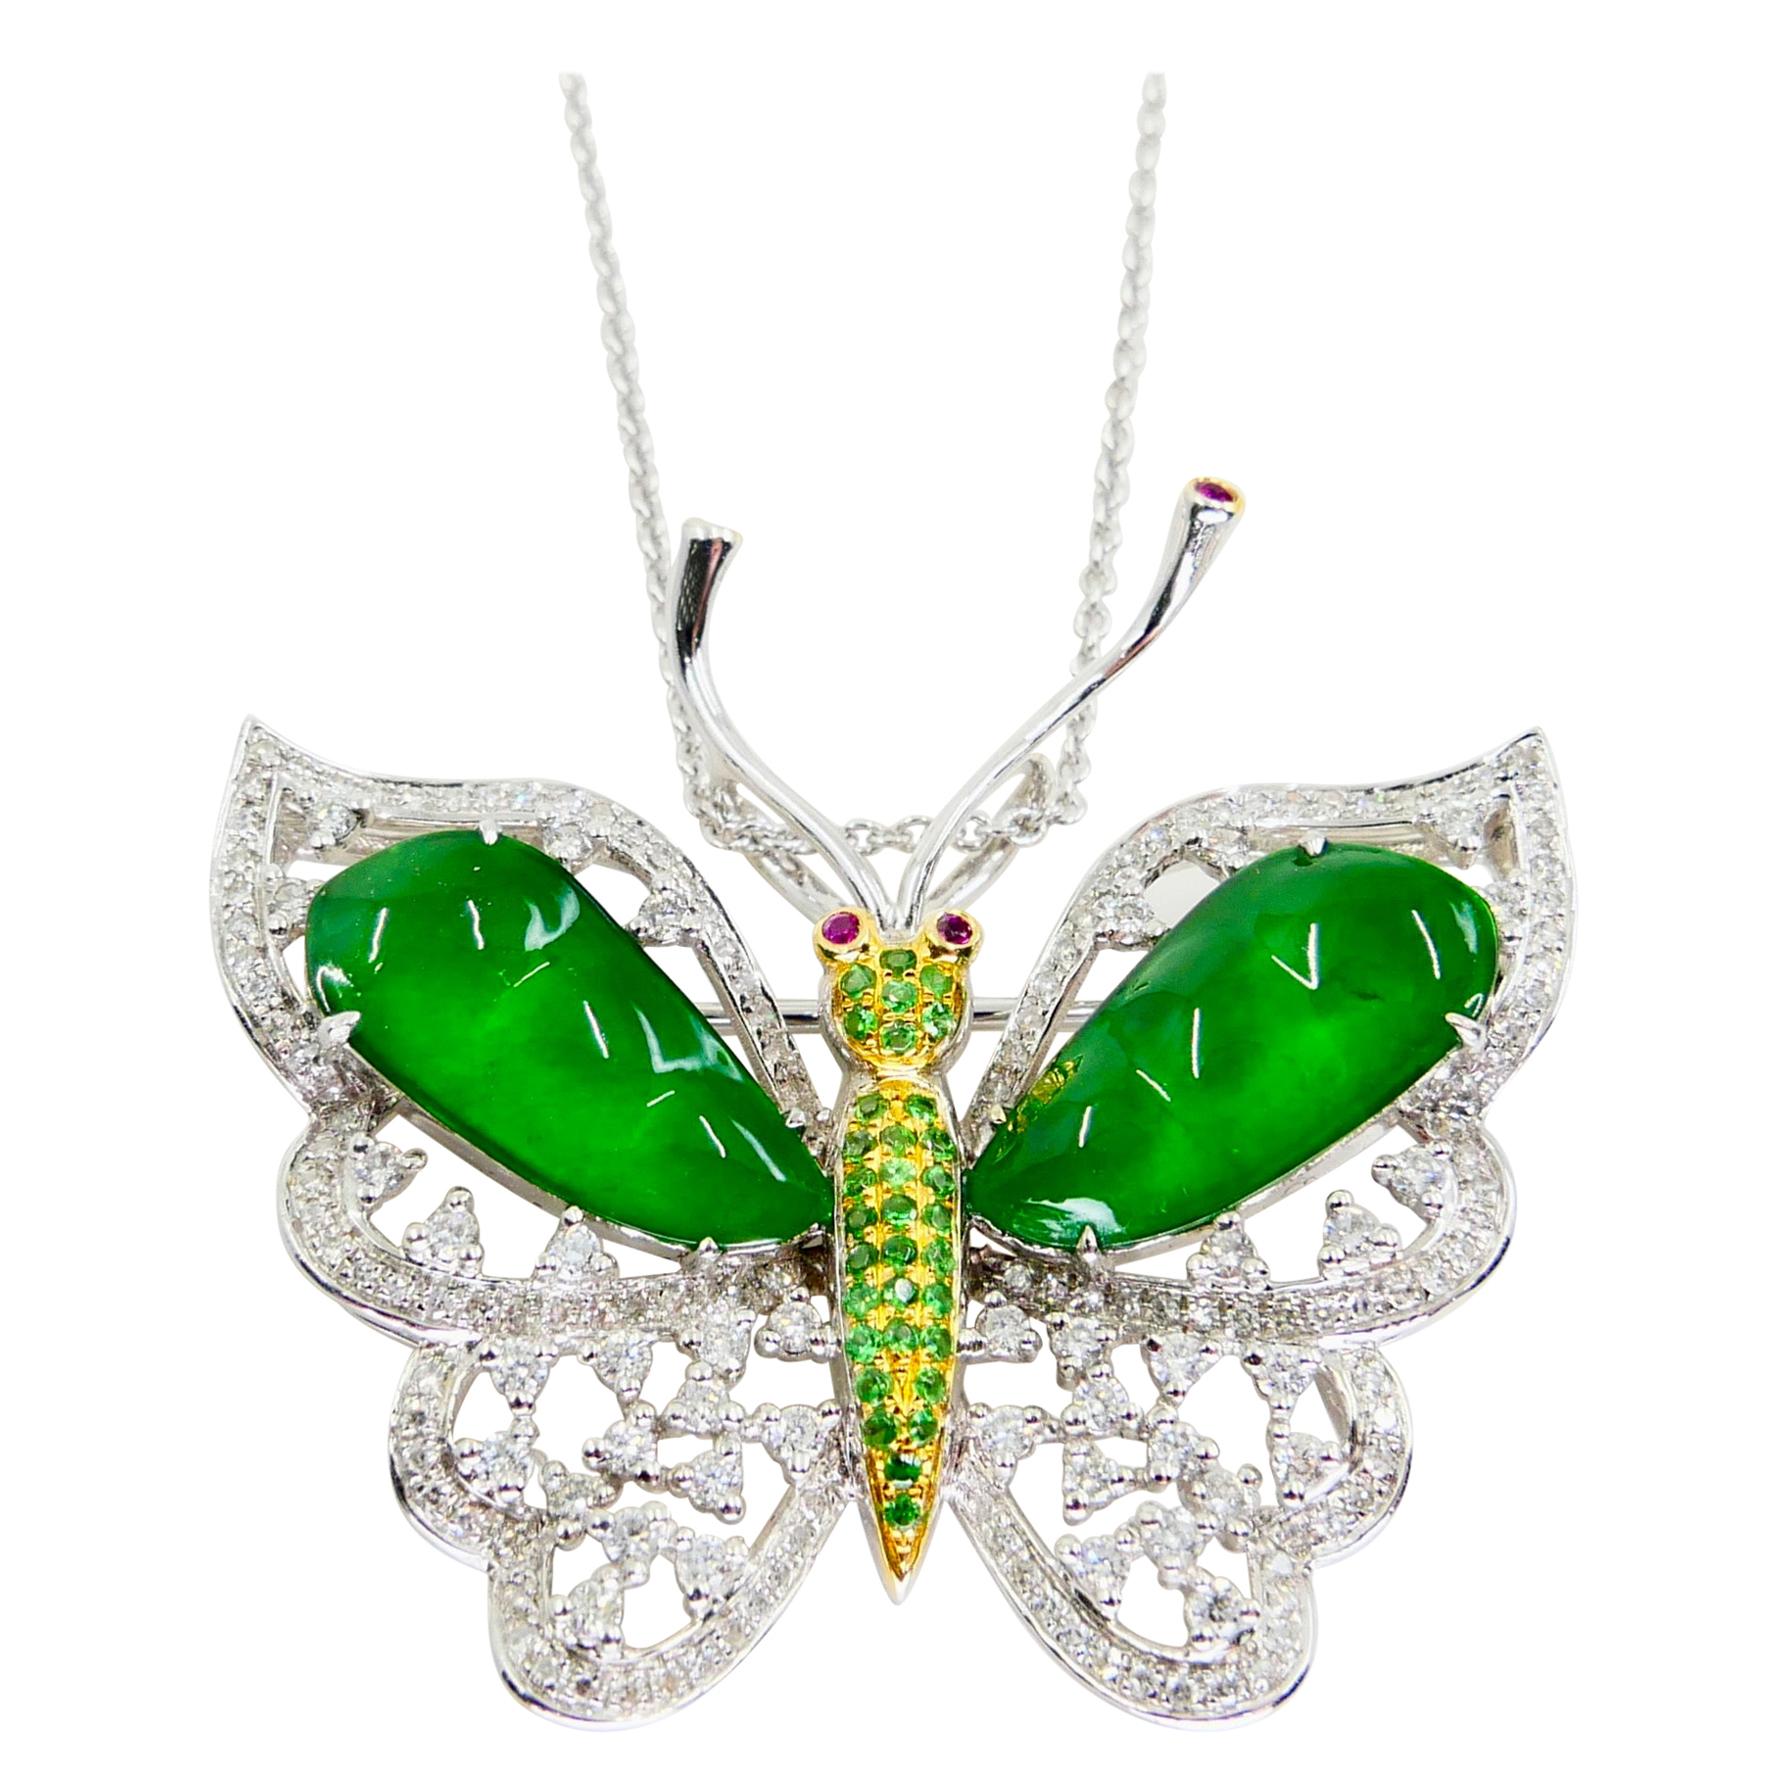 Certified Imperial Jade, Diamond Butterfly Pendant / Brooch, Collector Quality